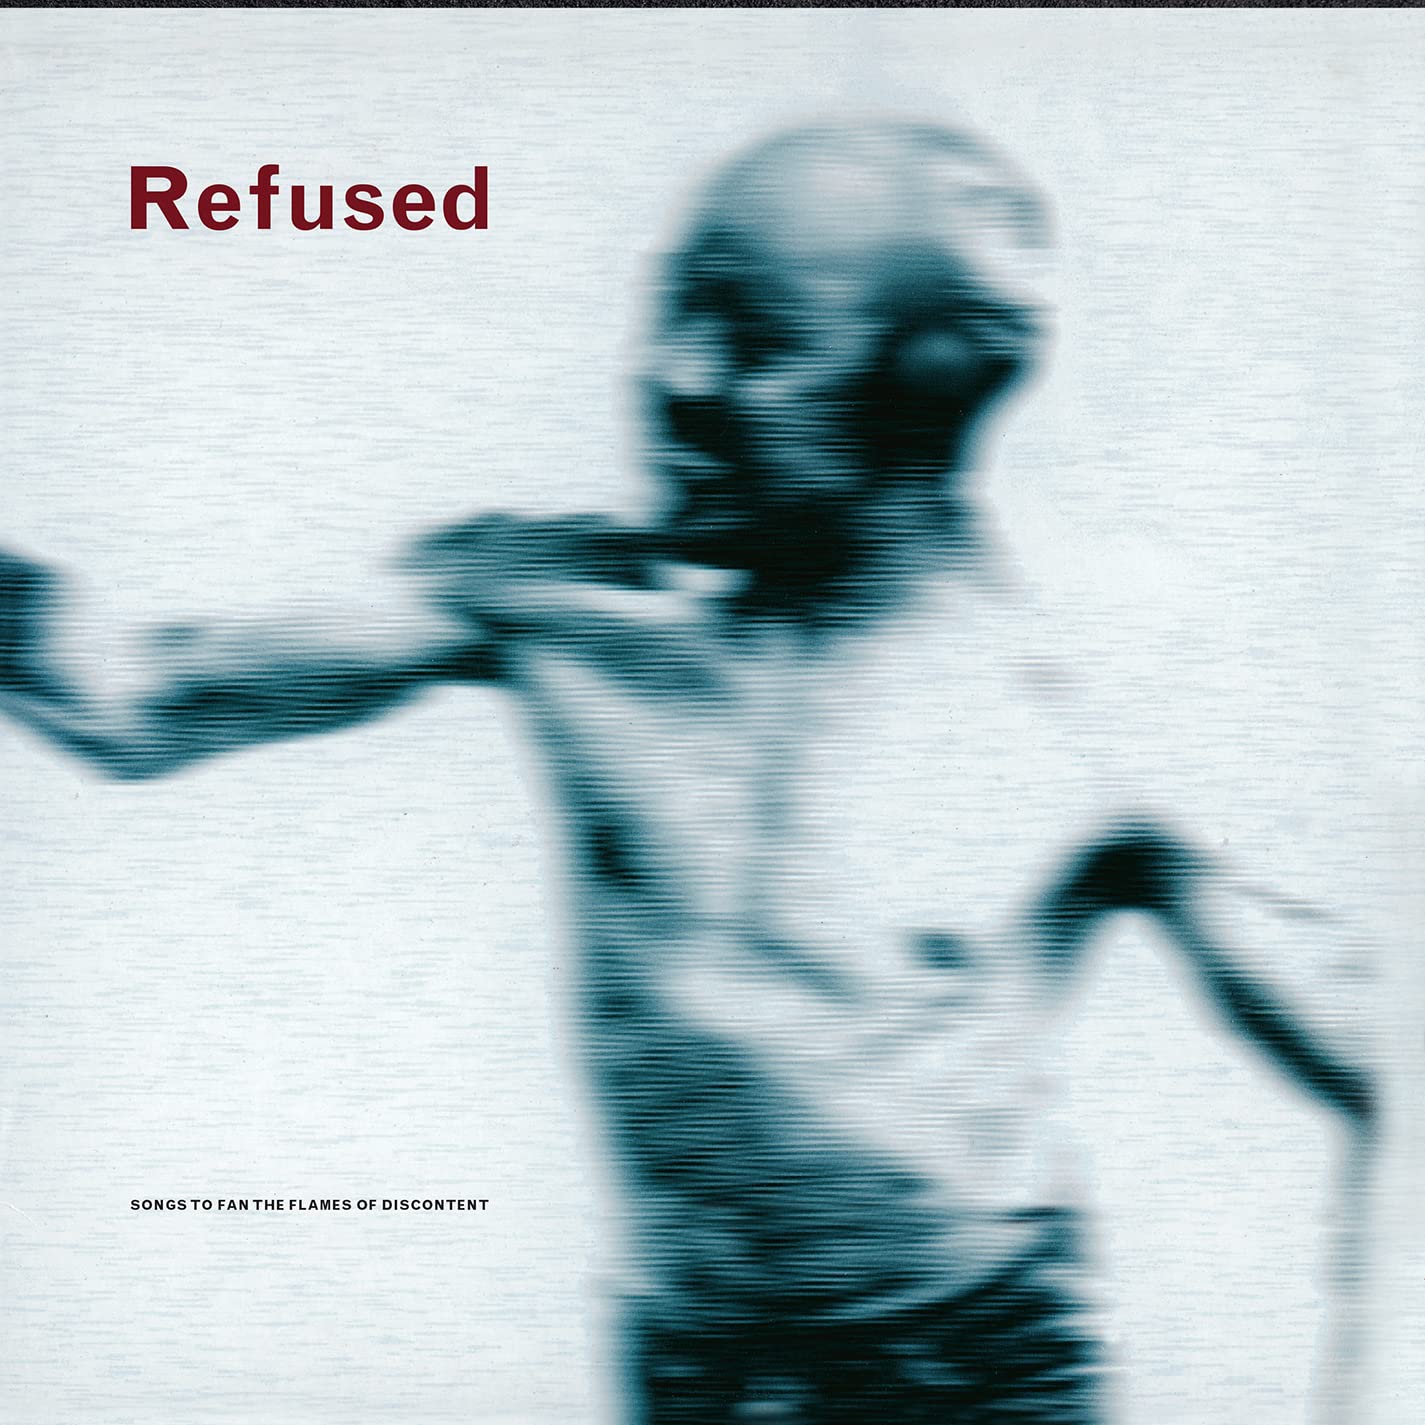 REFUSED - SONGS TO FAN THE FLAMES OF DISCONTENT Vinyl 2xLP